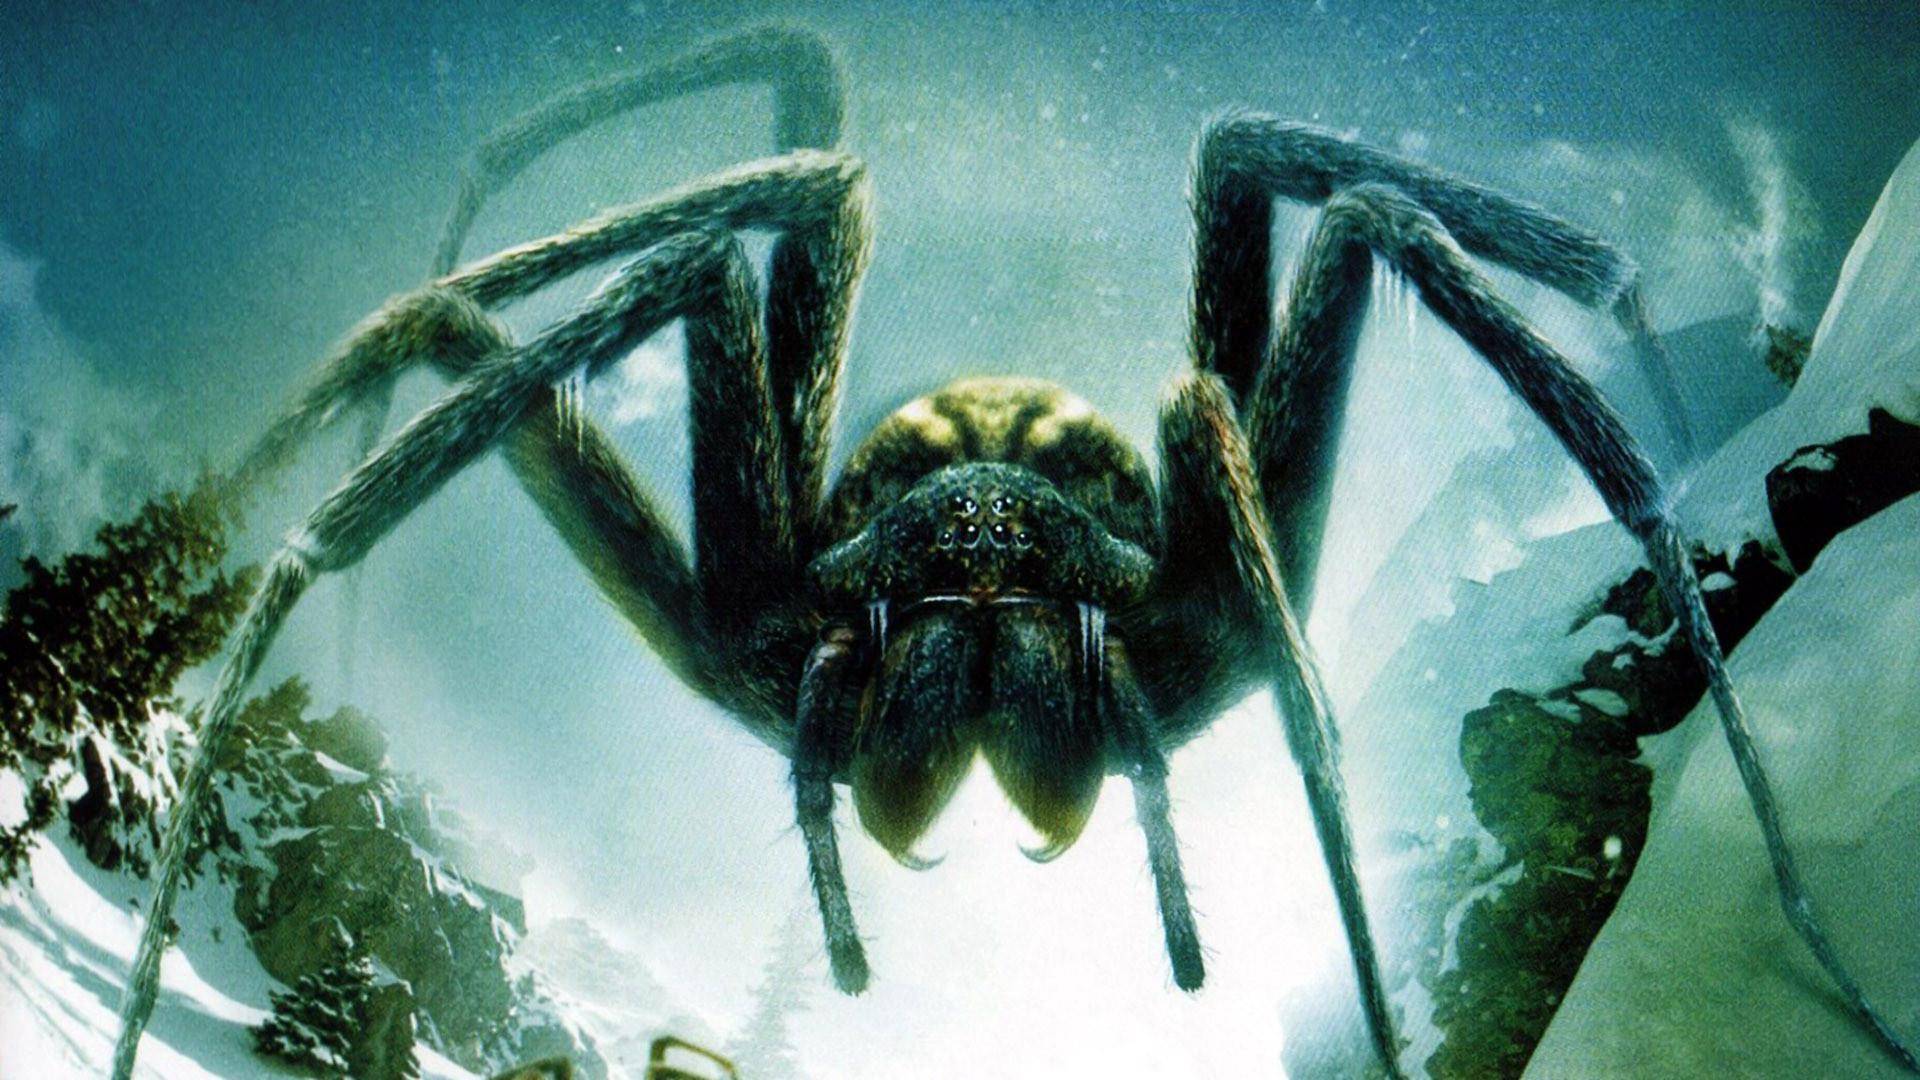 Wallpaper For Ice Spiders Is A Horror Sci Fi